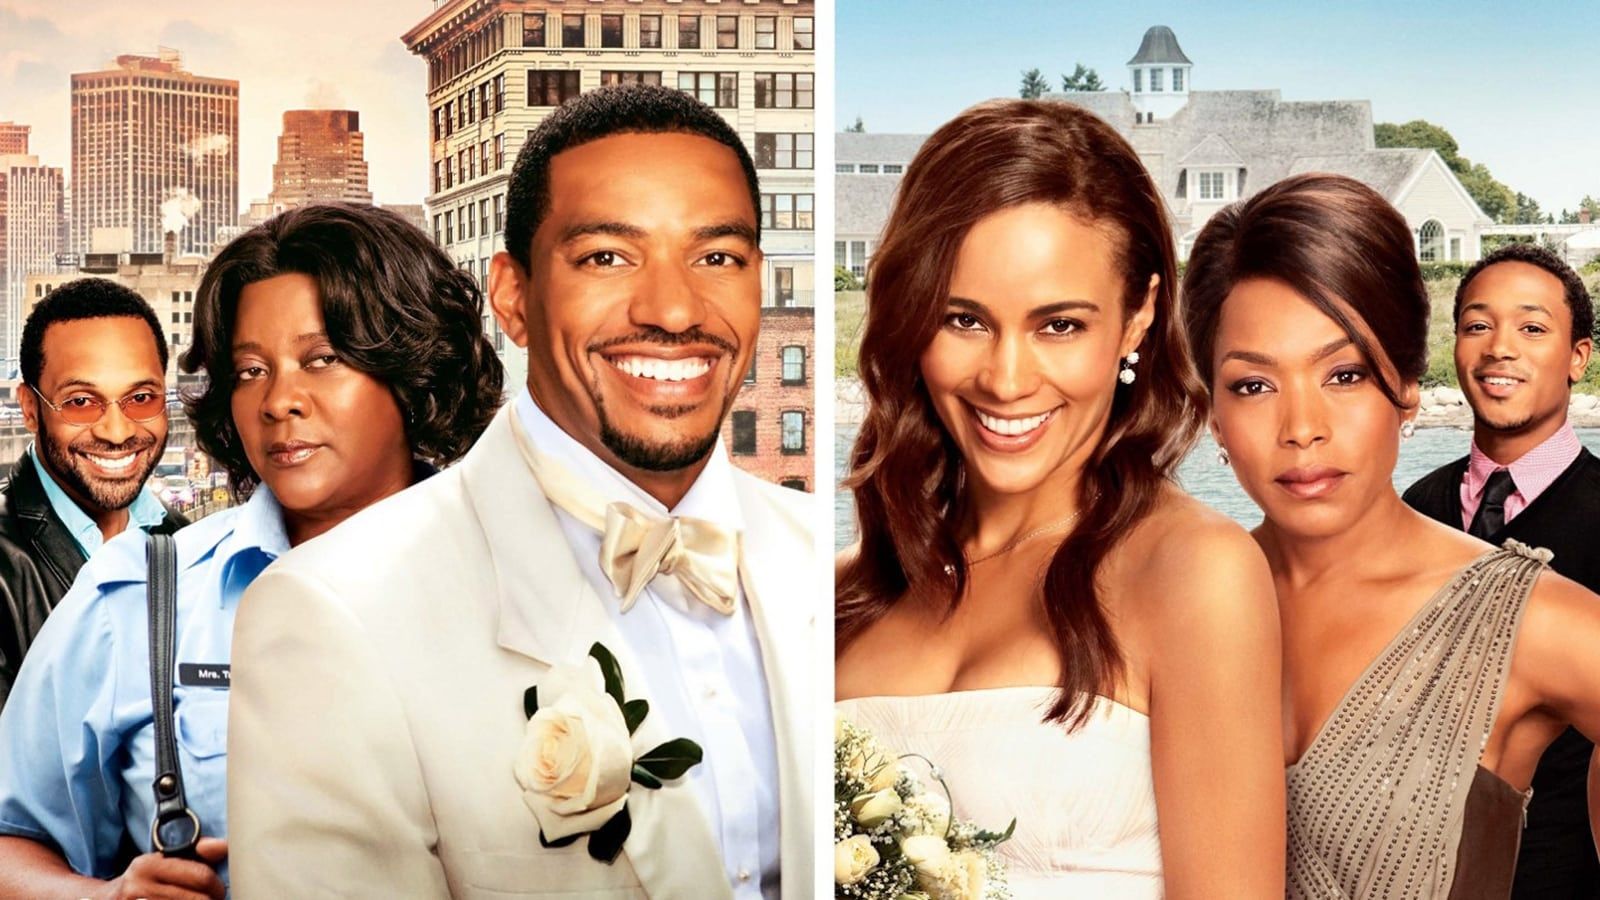 jumping the broom cast